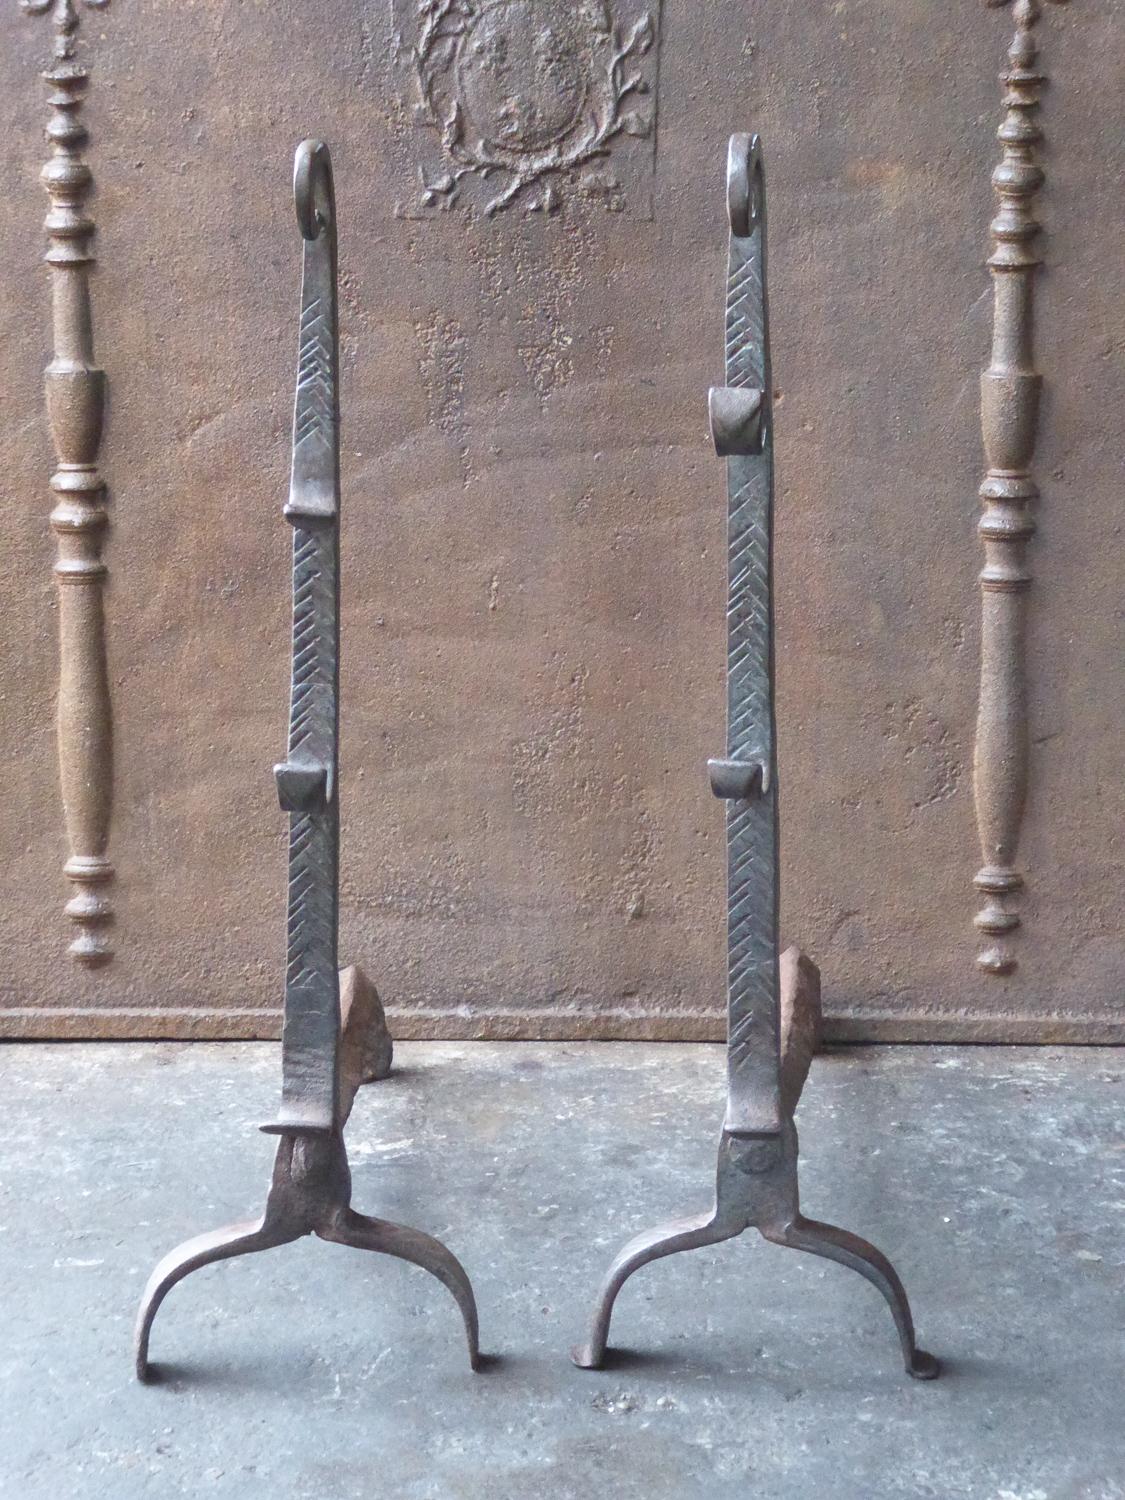 Large 17th century French andirons. The style of the andirons is Louis XIII and they are from that period. The andirons are made of wrought iron and they have a natural brown patina. Upon request it can be made black. The andirons have spit hooks to